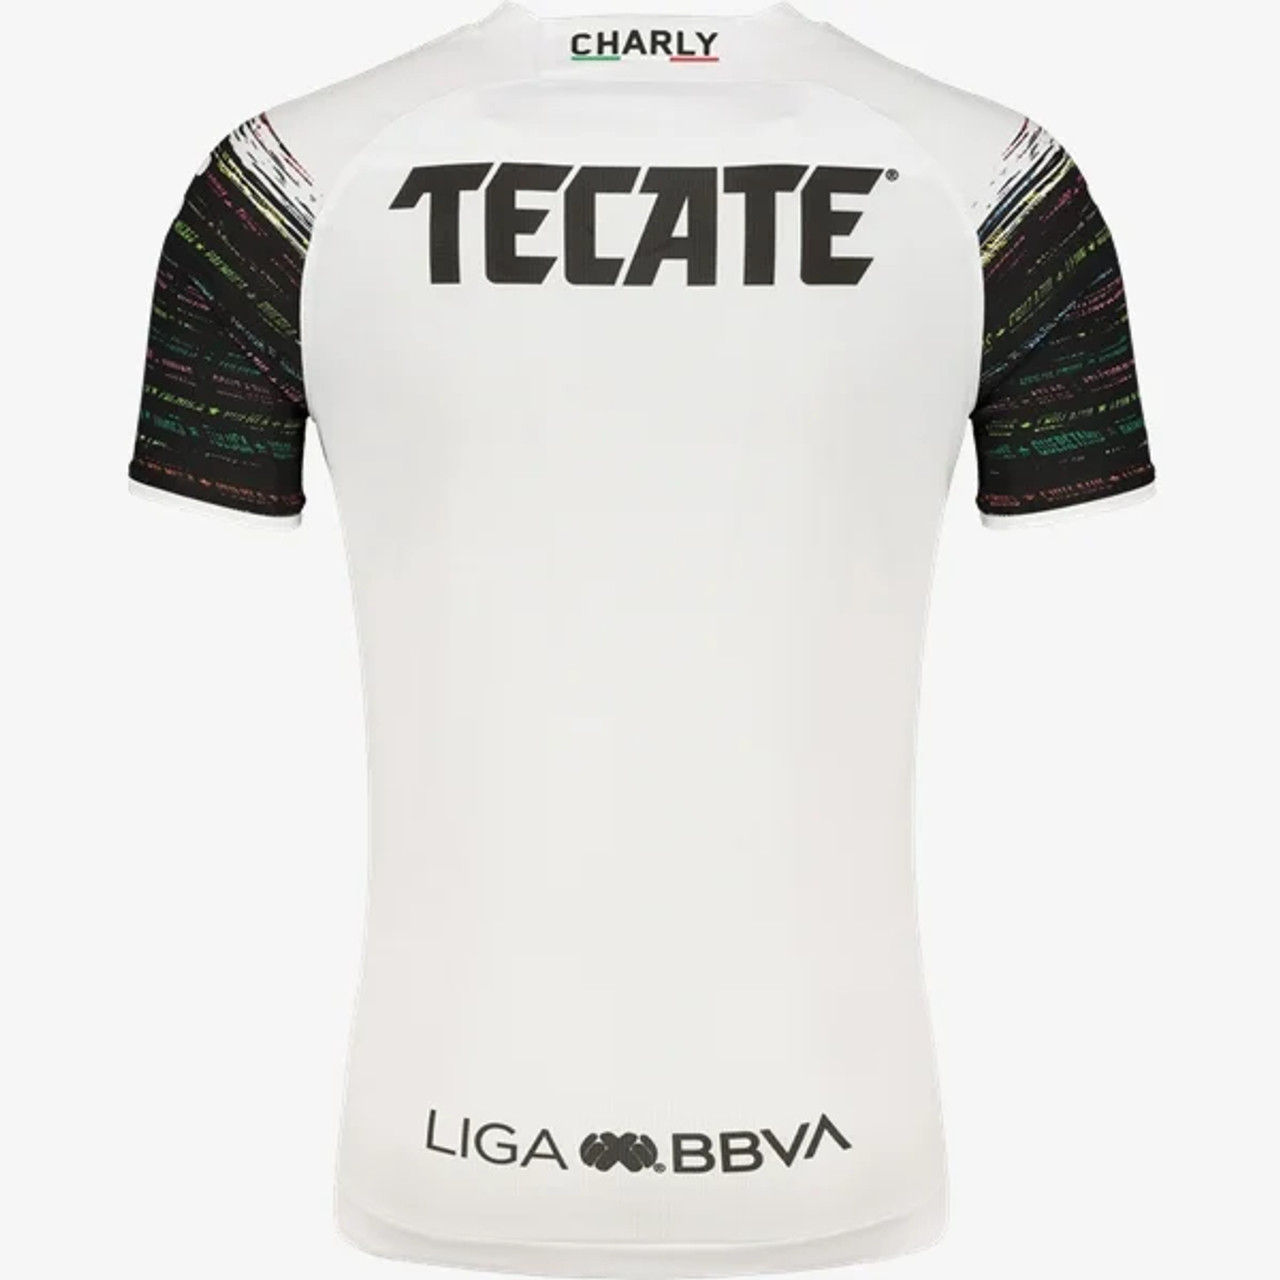 Charly Soccer Jersey, Mexican Soccer Jerseys